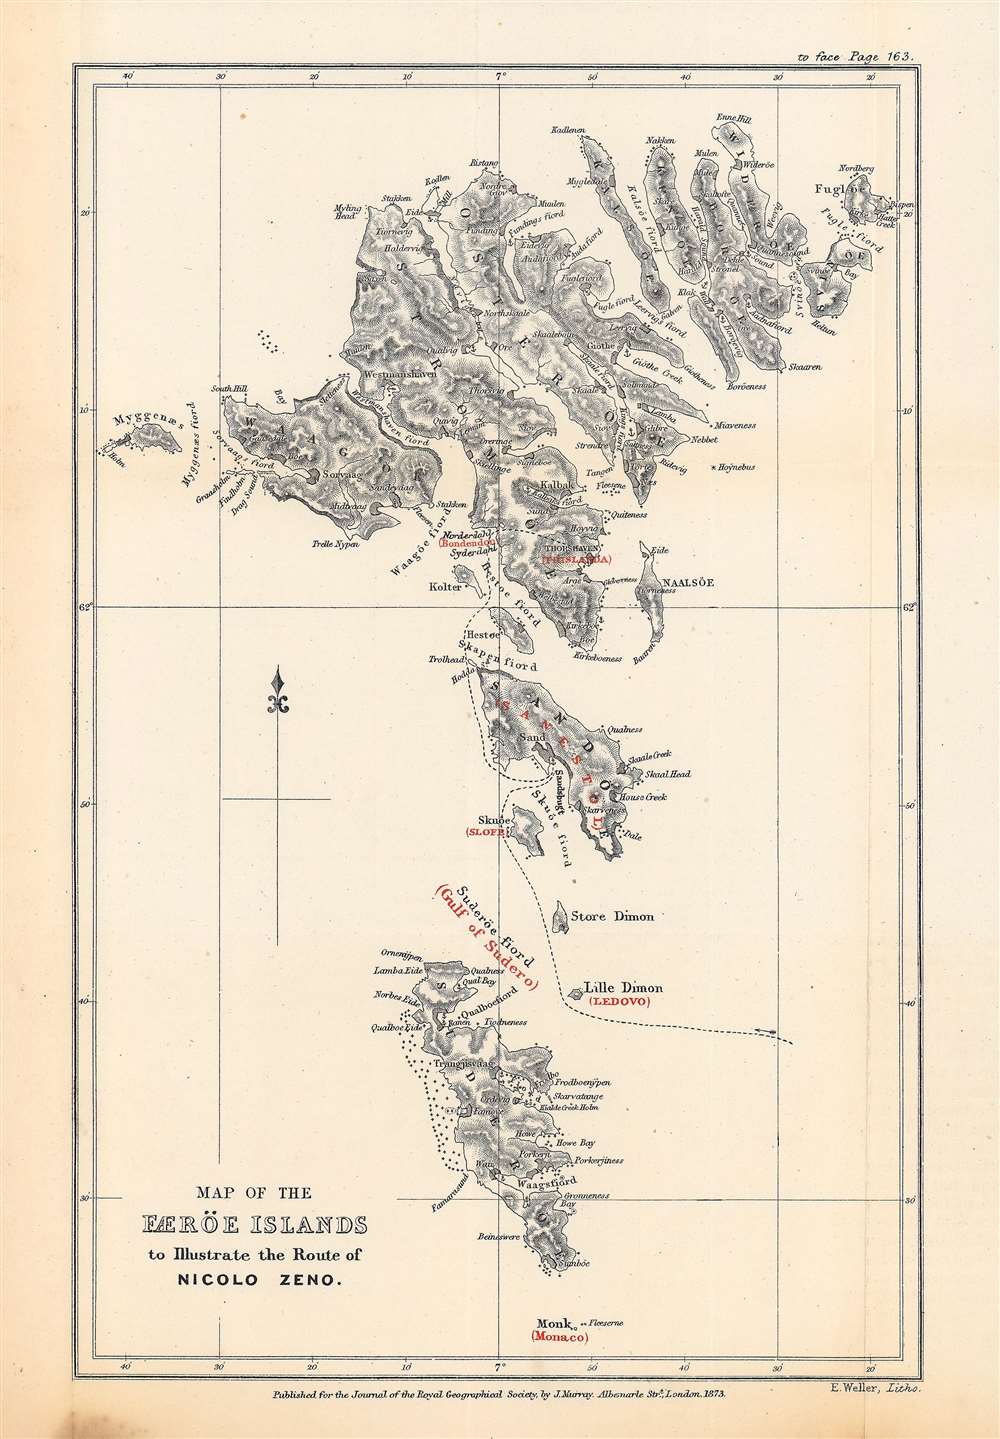 Map of the Færöe Islands, to Illustrate the Route of Nicolo Zeno. - Main View